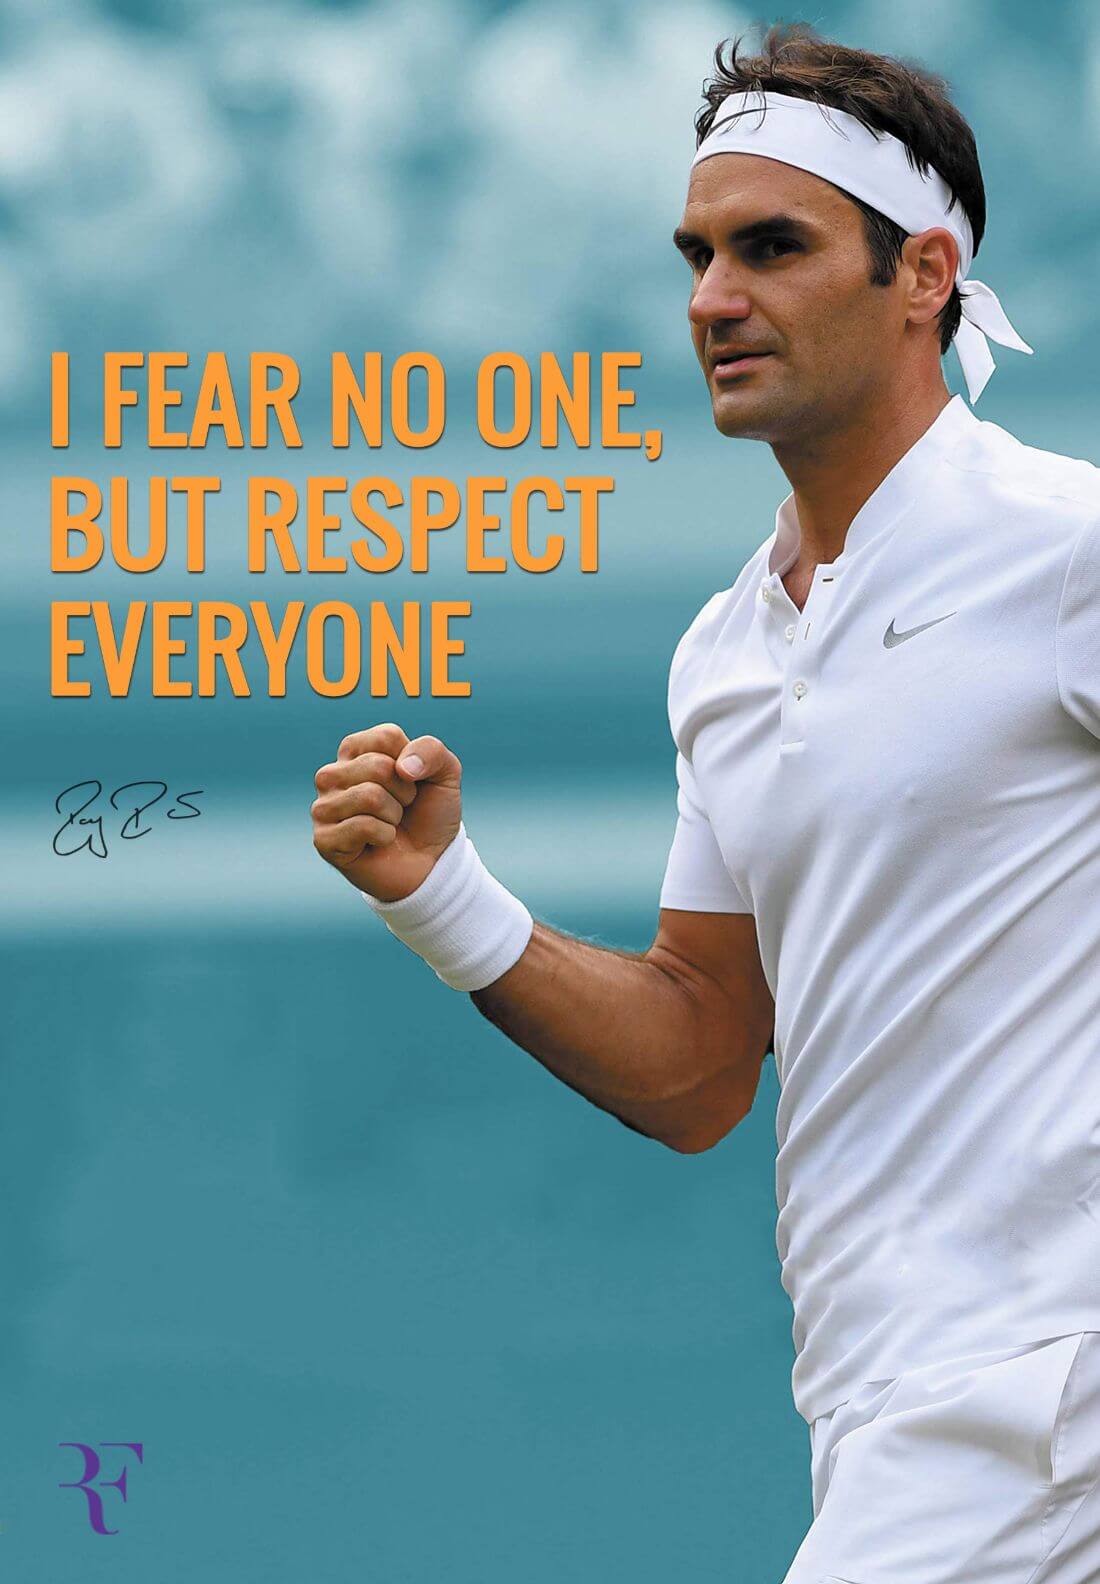 Roger Federer - I Fear No One But Respect Everyone - Tennis GOAT